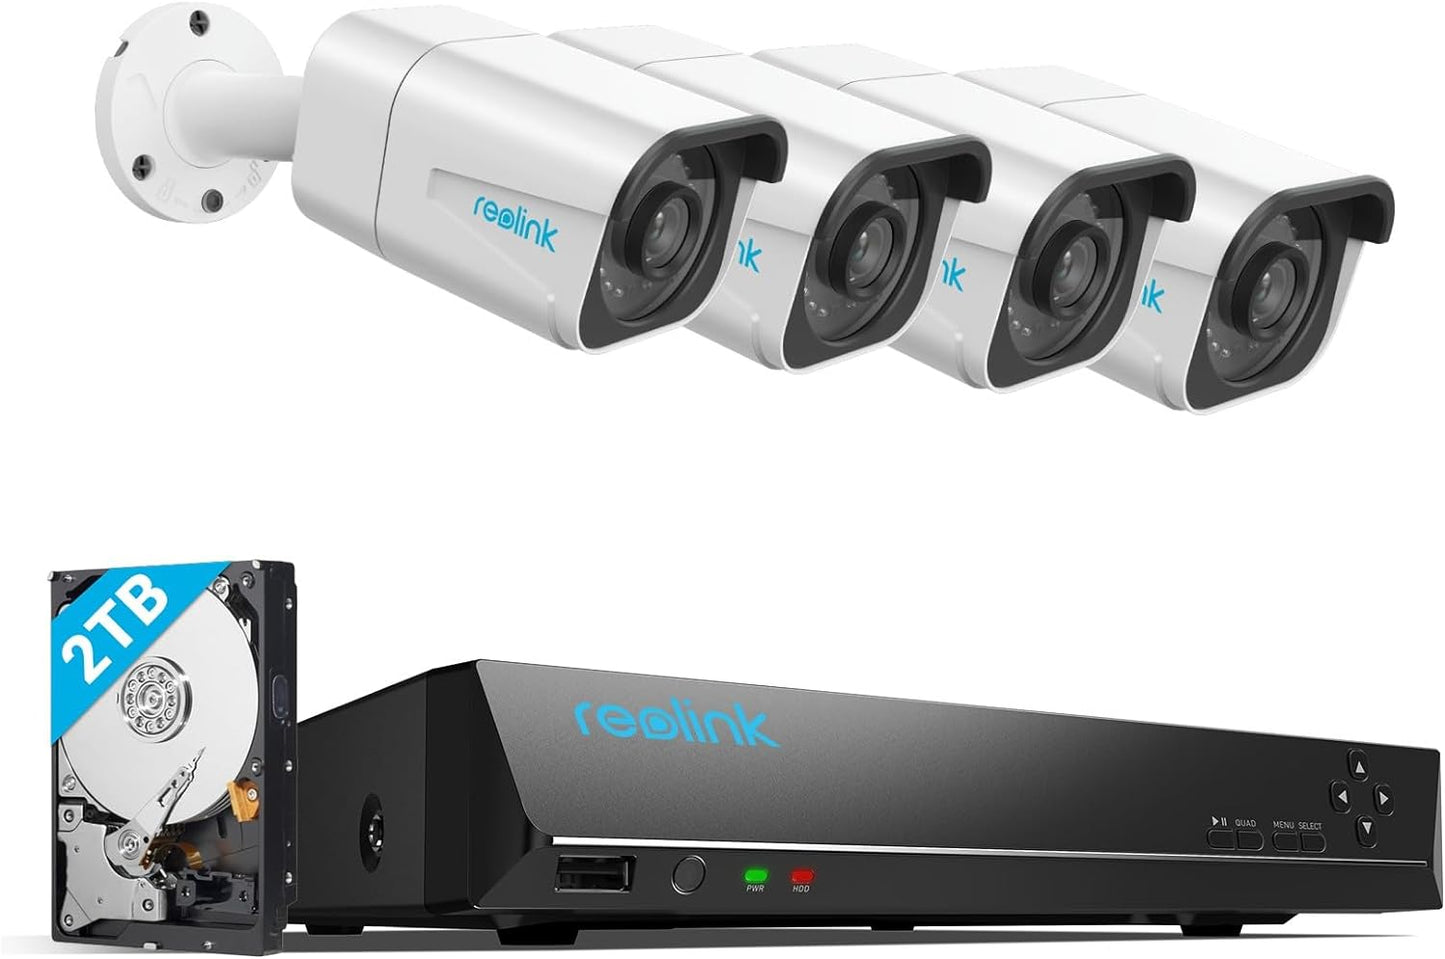 Reolink 4K PoE Security Camera Kit System H.265, 4pcs 8MP Person/Vehicle Detection Wired Outdoor PoE CCTV IP Cameras and 8CH NVR with 2TB HDD for 24/7 Recording Night Vision Audio, RLK8-800B4